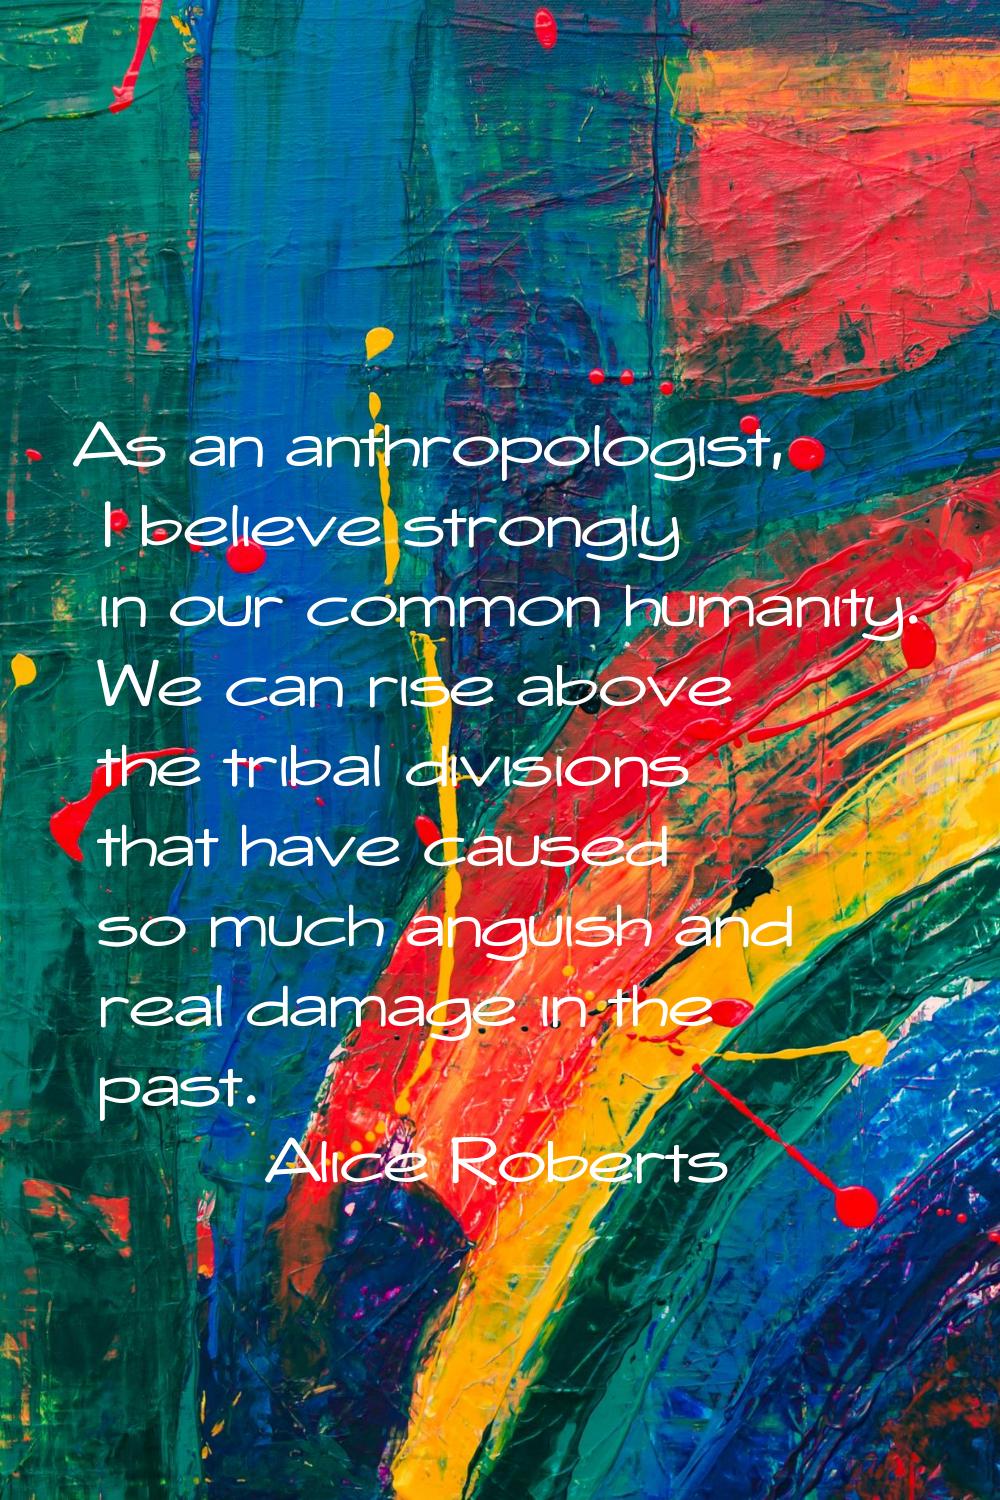 As an anthropologist, I believe strongly in our common humanity. We can rise above the tribal divis